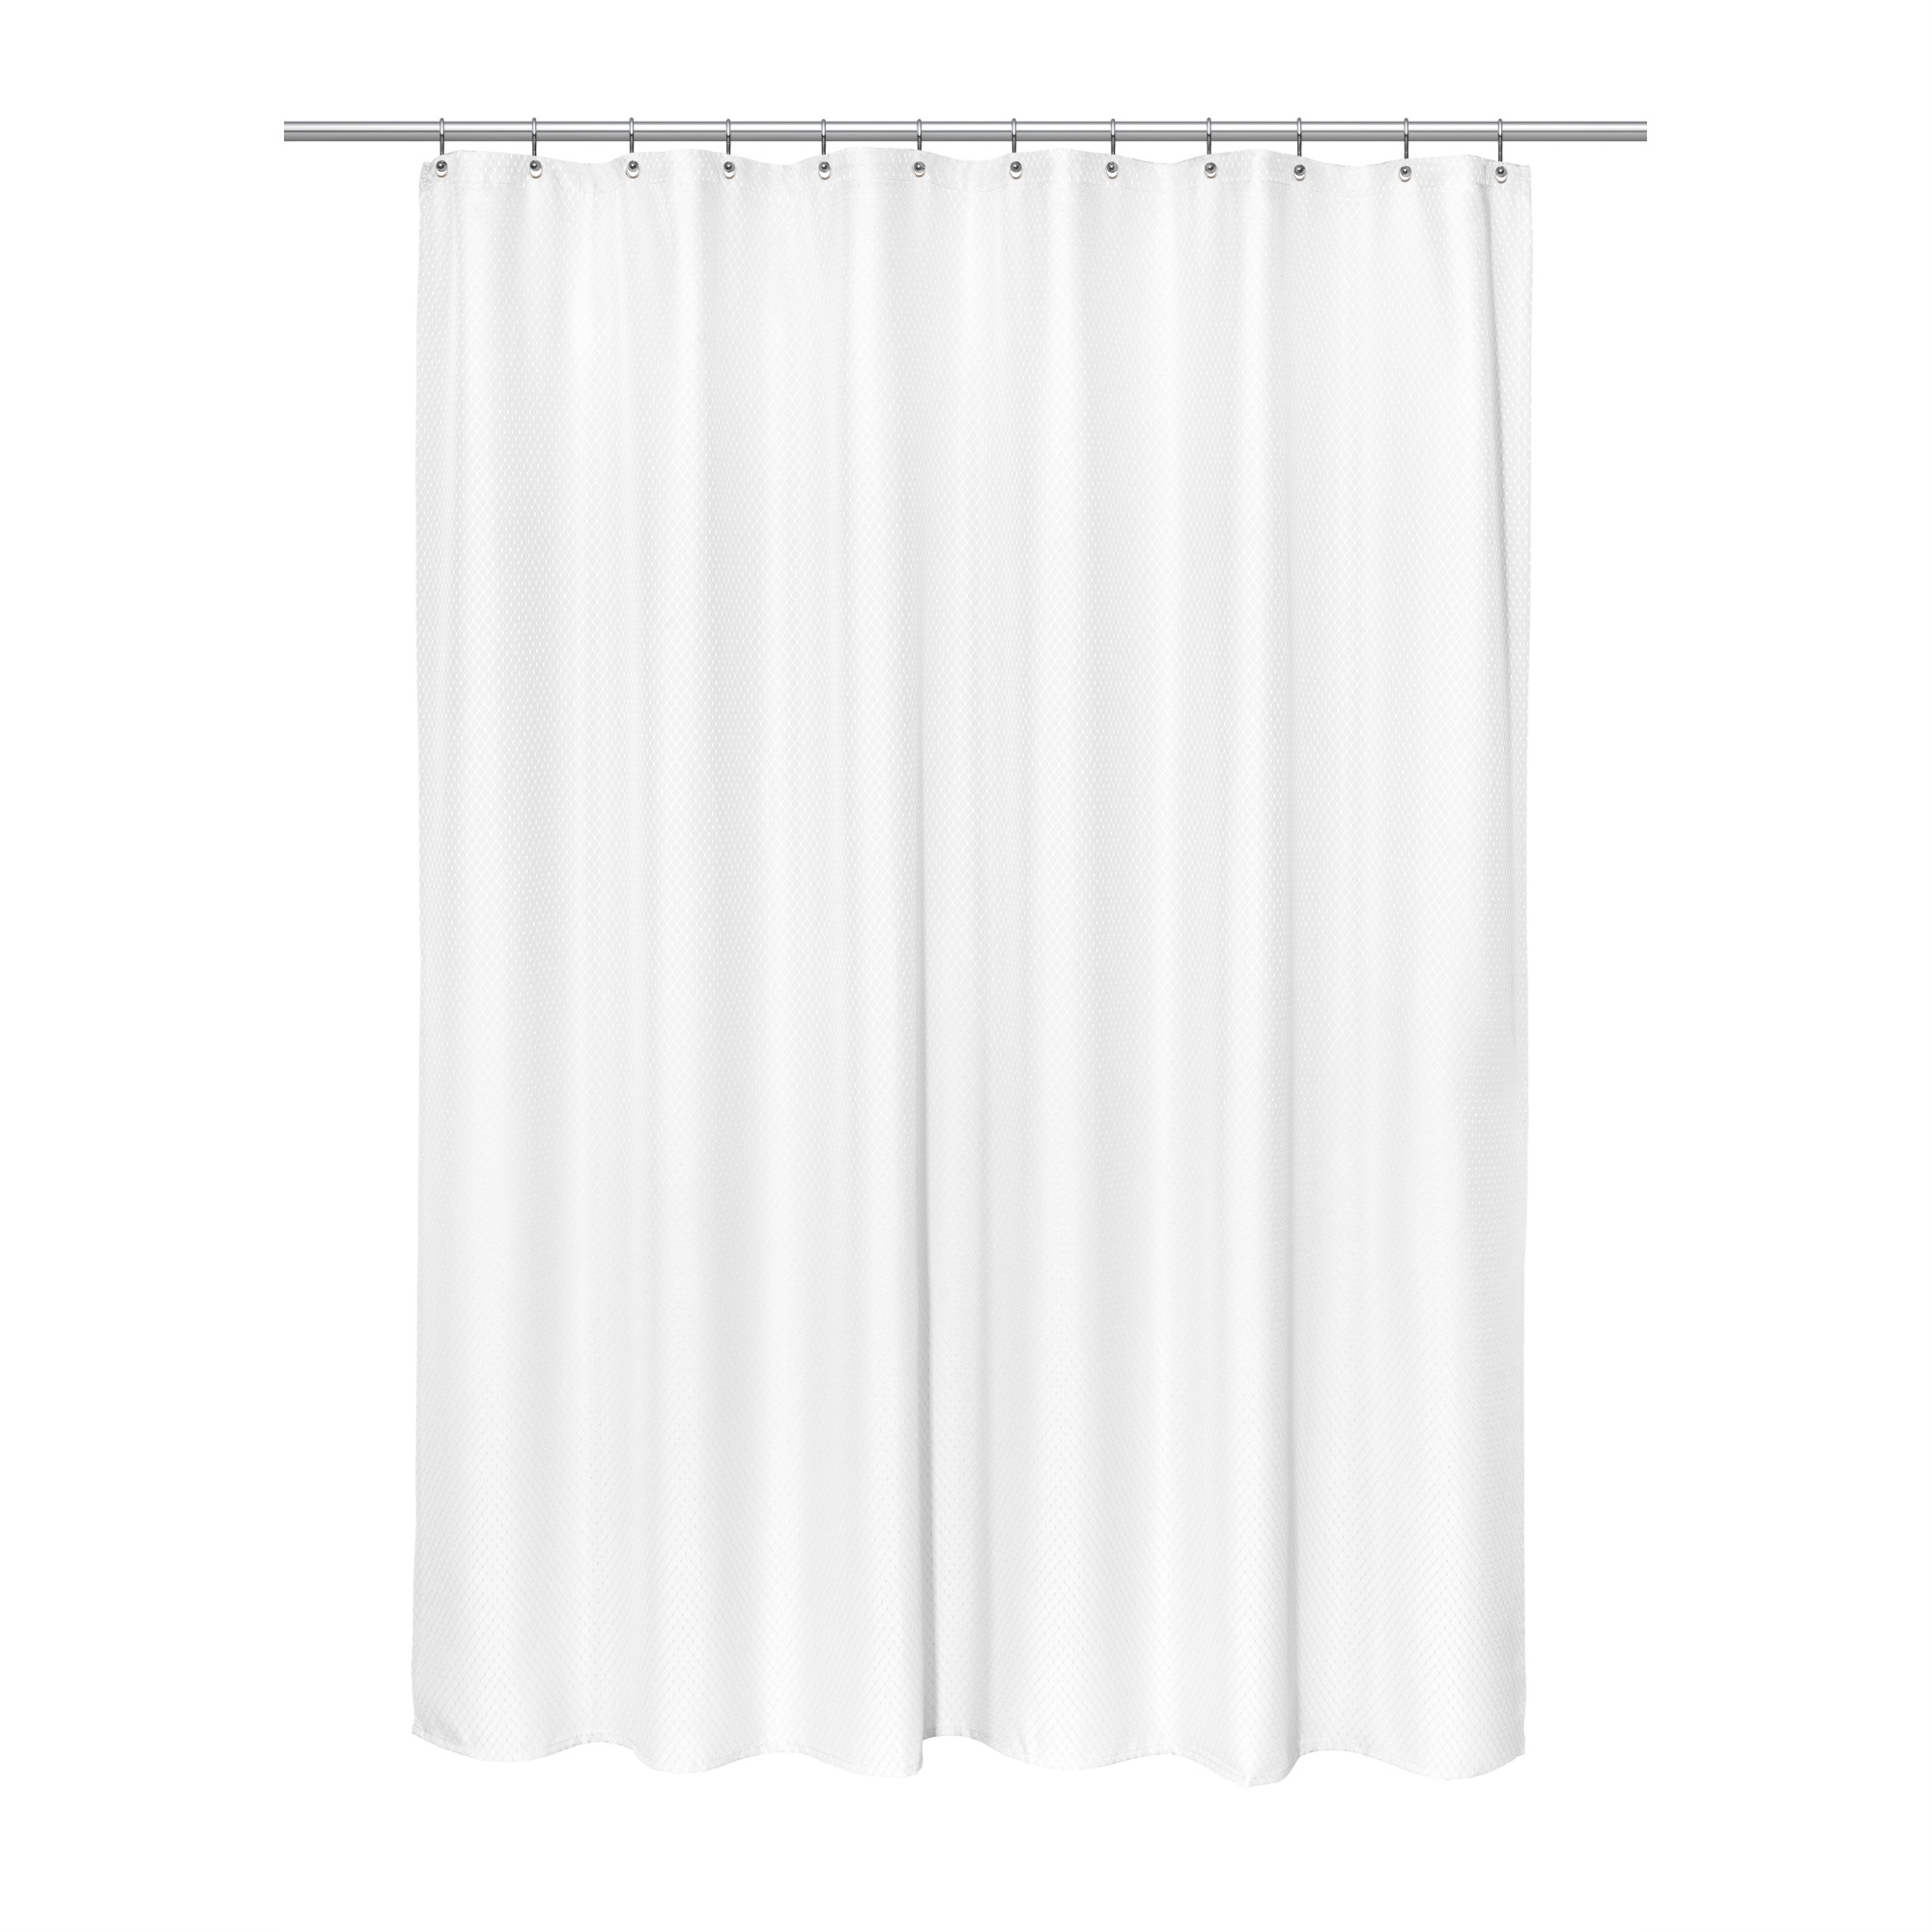 Carnation Home Fashions "Grace" Jacquard 70"x84" Shower Curtain in White